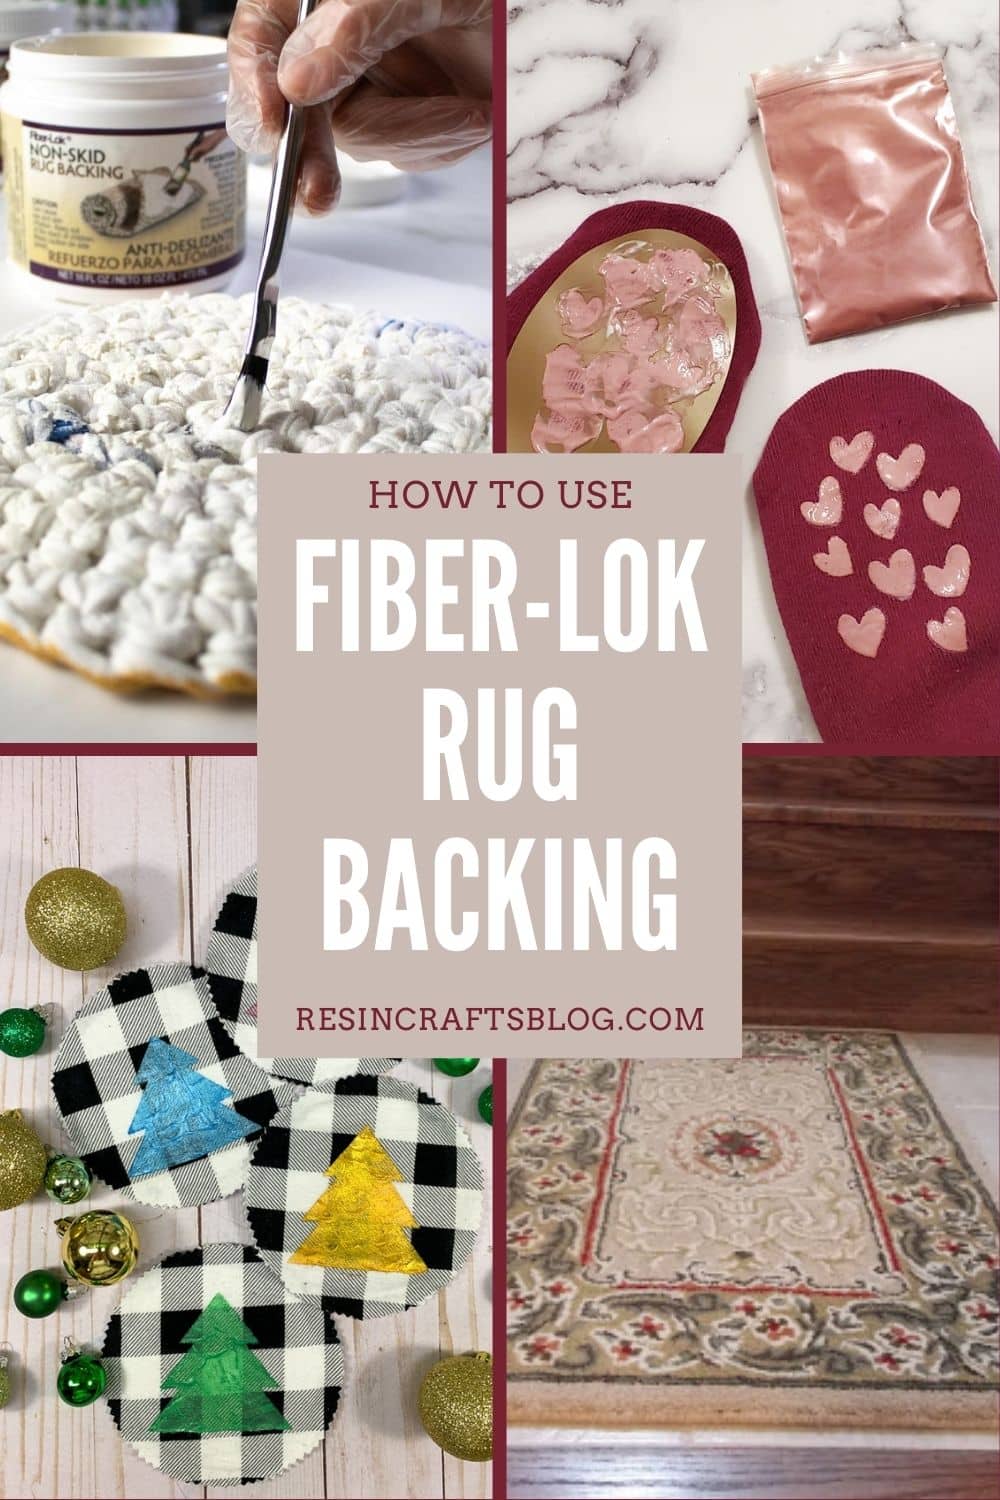 How to Keep Rugs From Sliding with Fiber-Lok Non-Skid Rug Backing